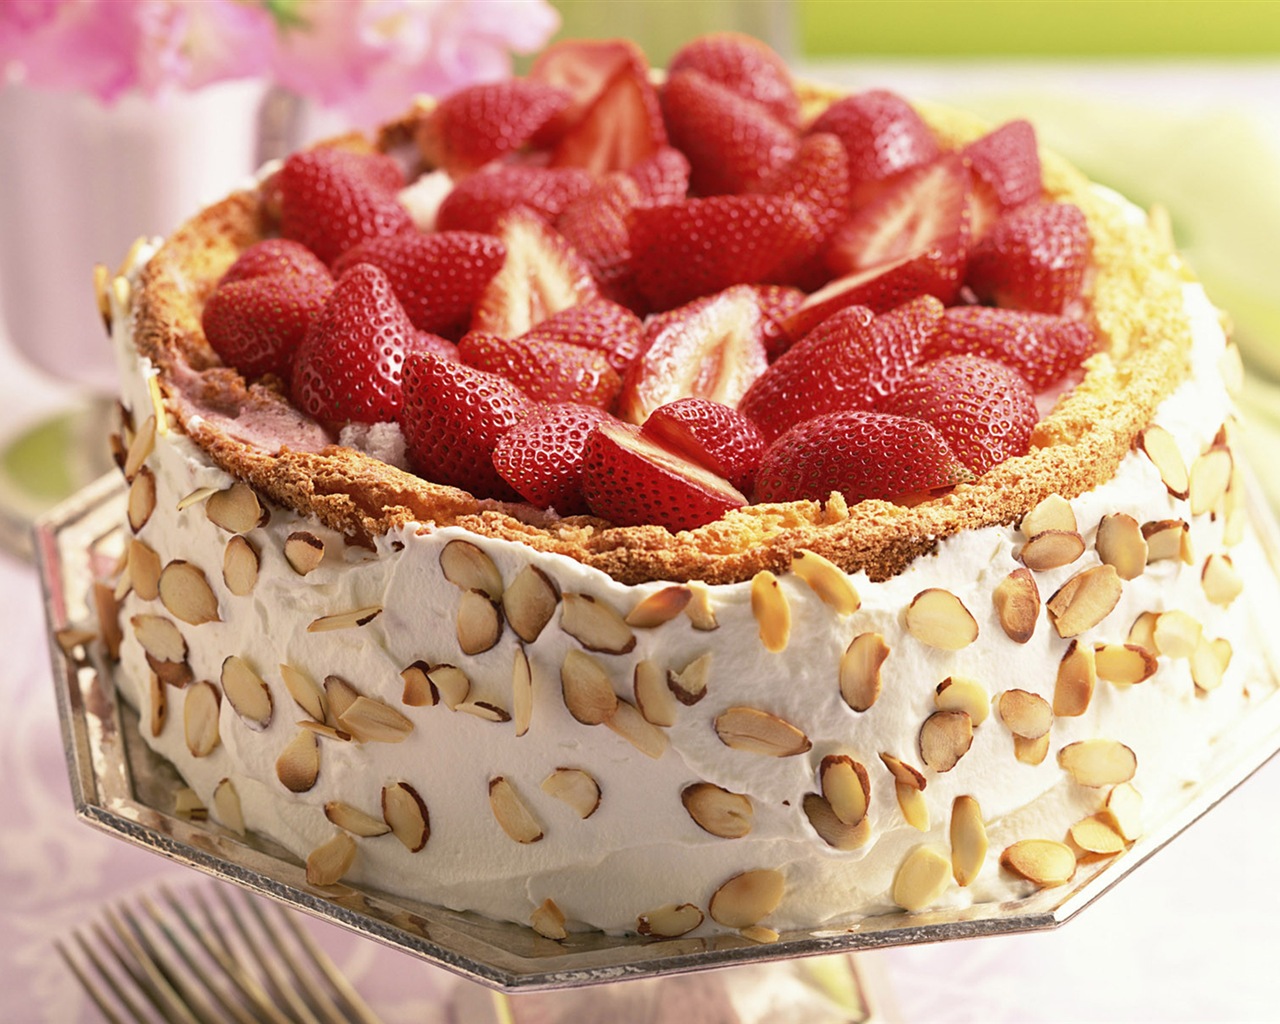 Delicious strawberry cake HD wallpapers #21 - 1280x1024